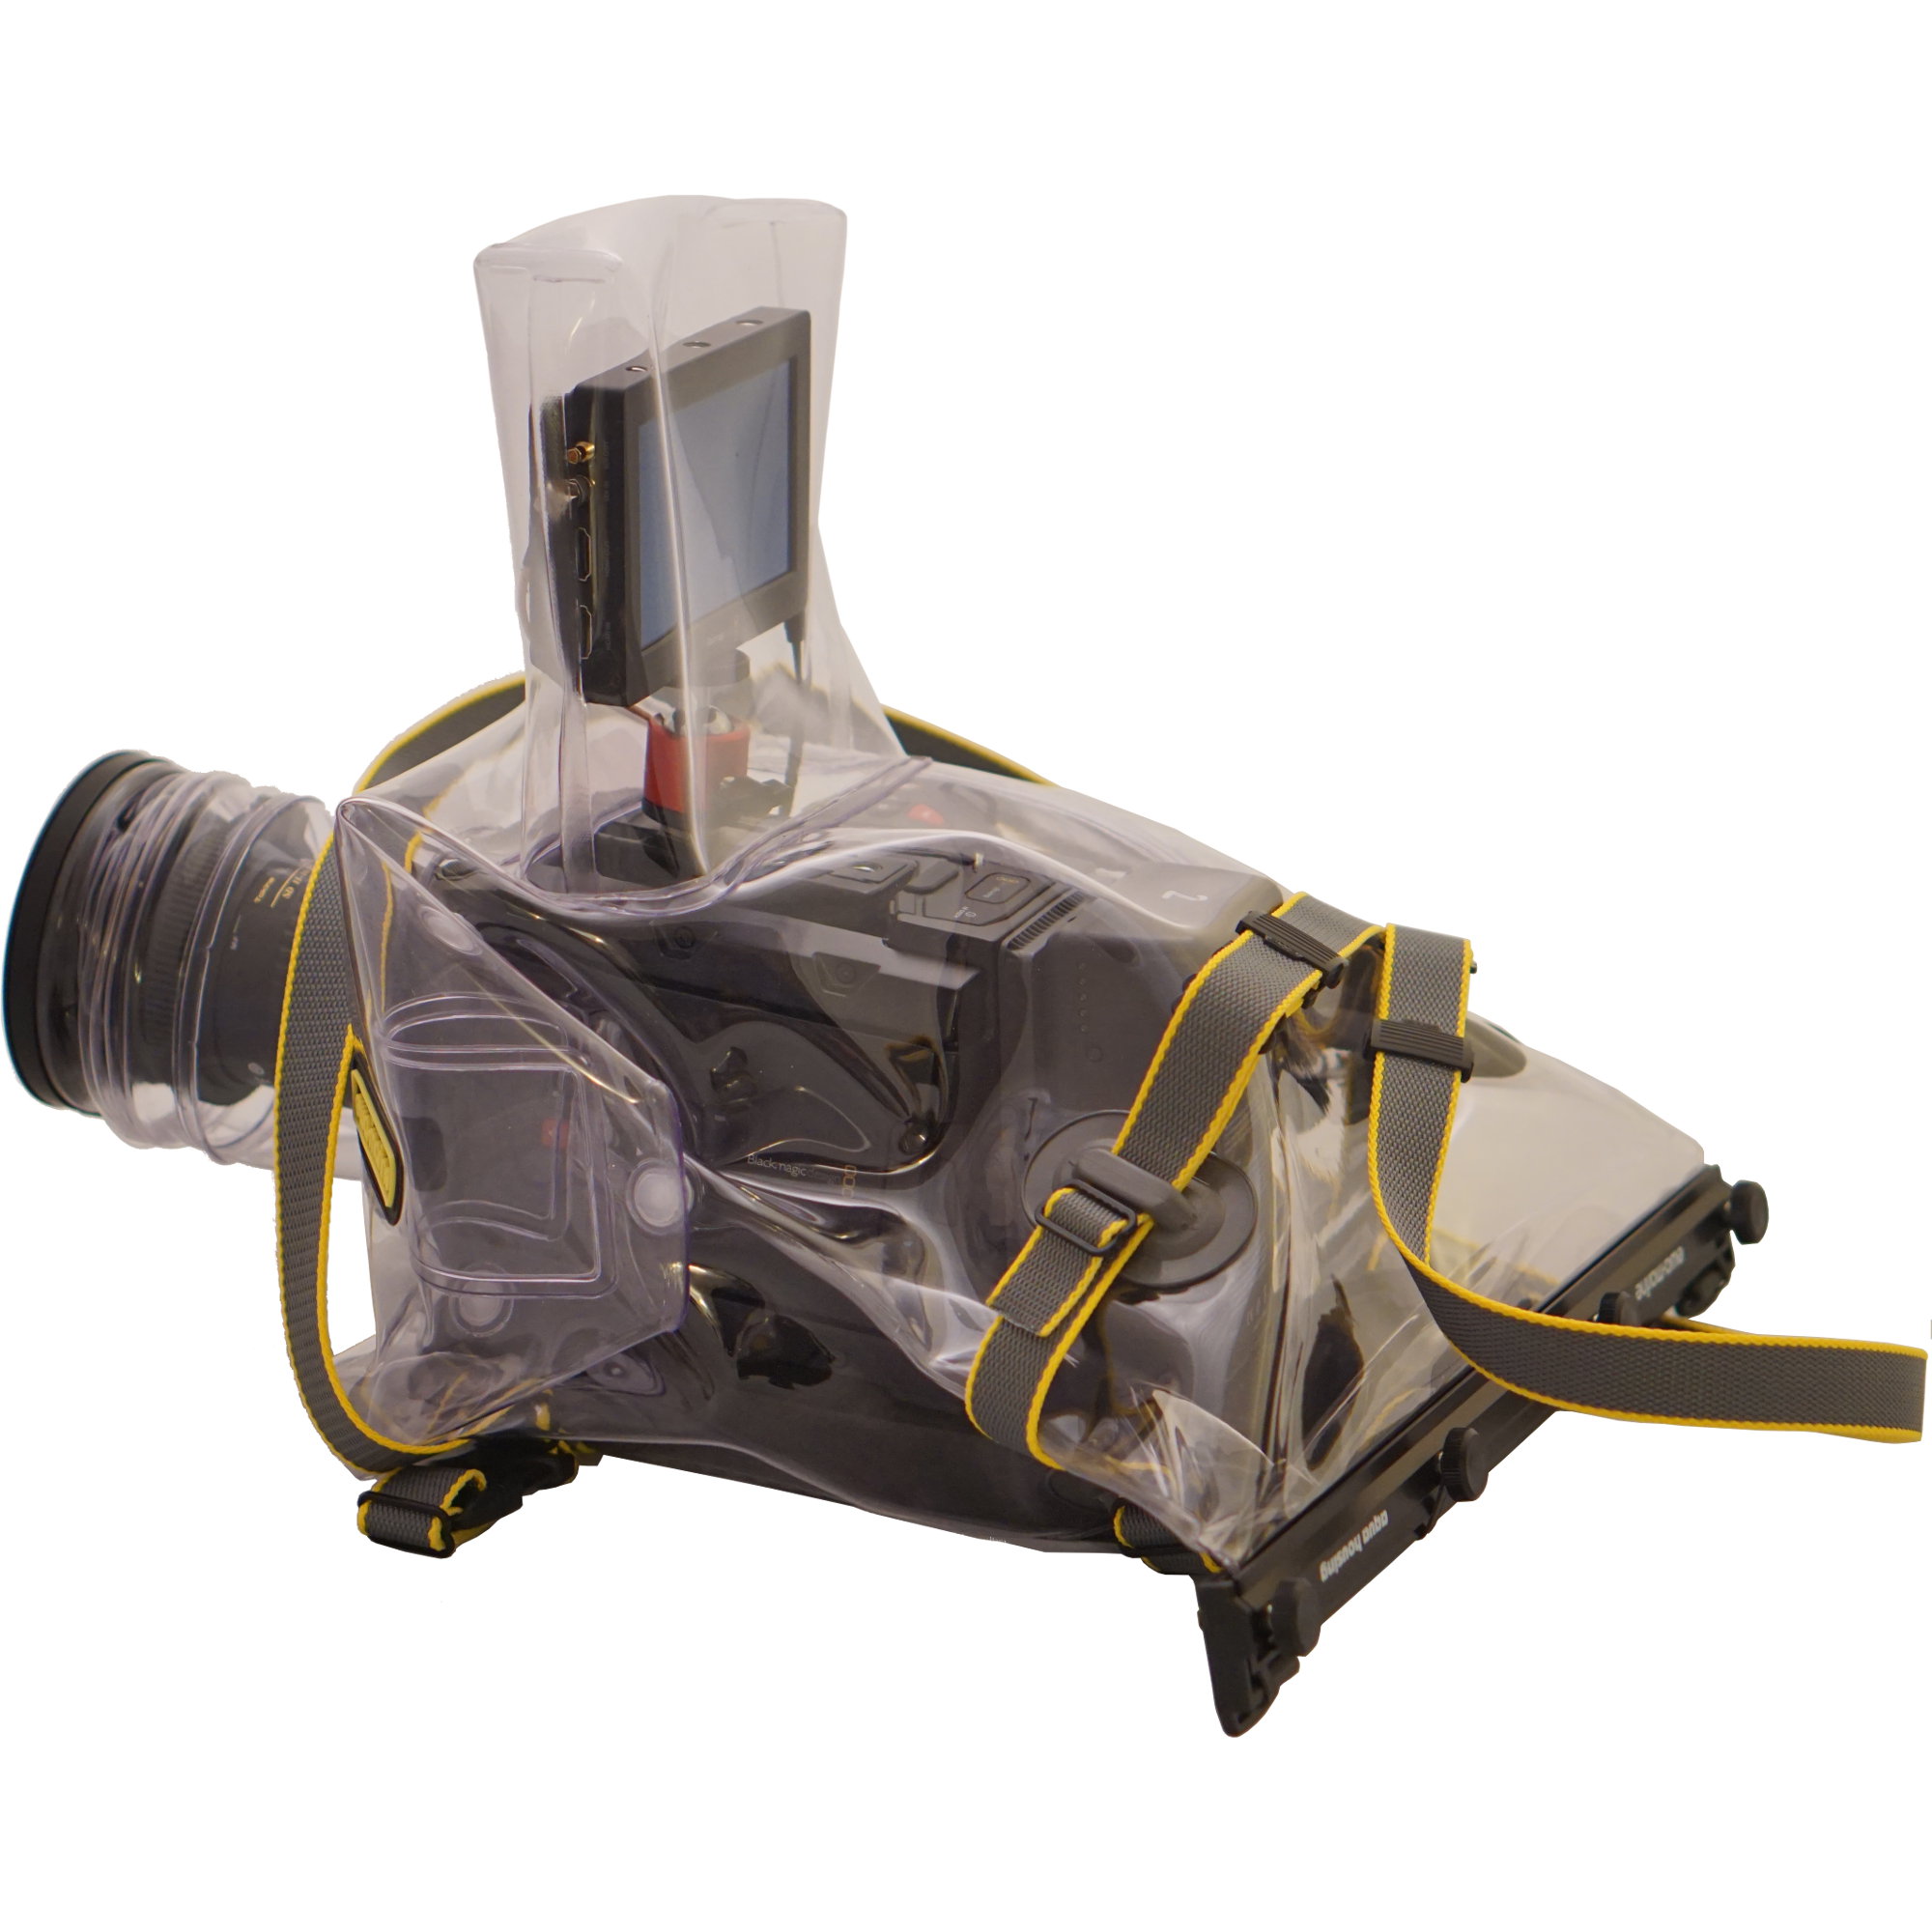 ewa-marine A-BM2 underwater housing (camera as examples and not included)